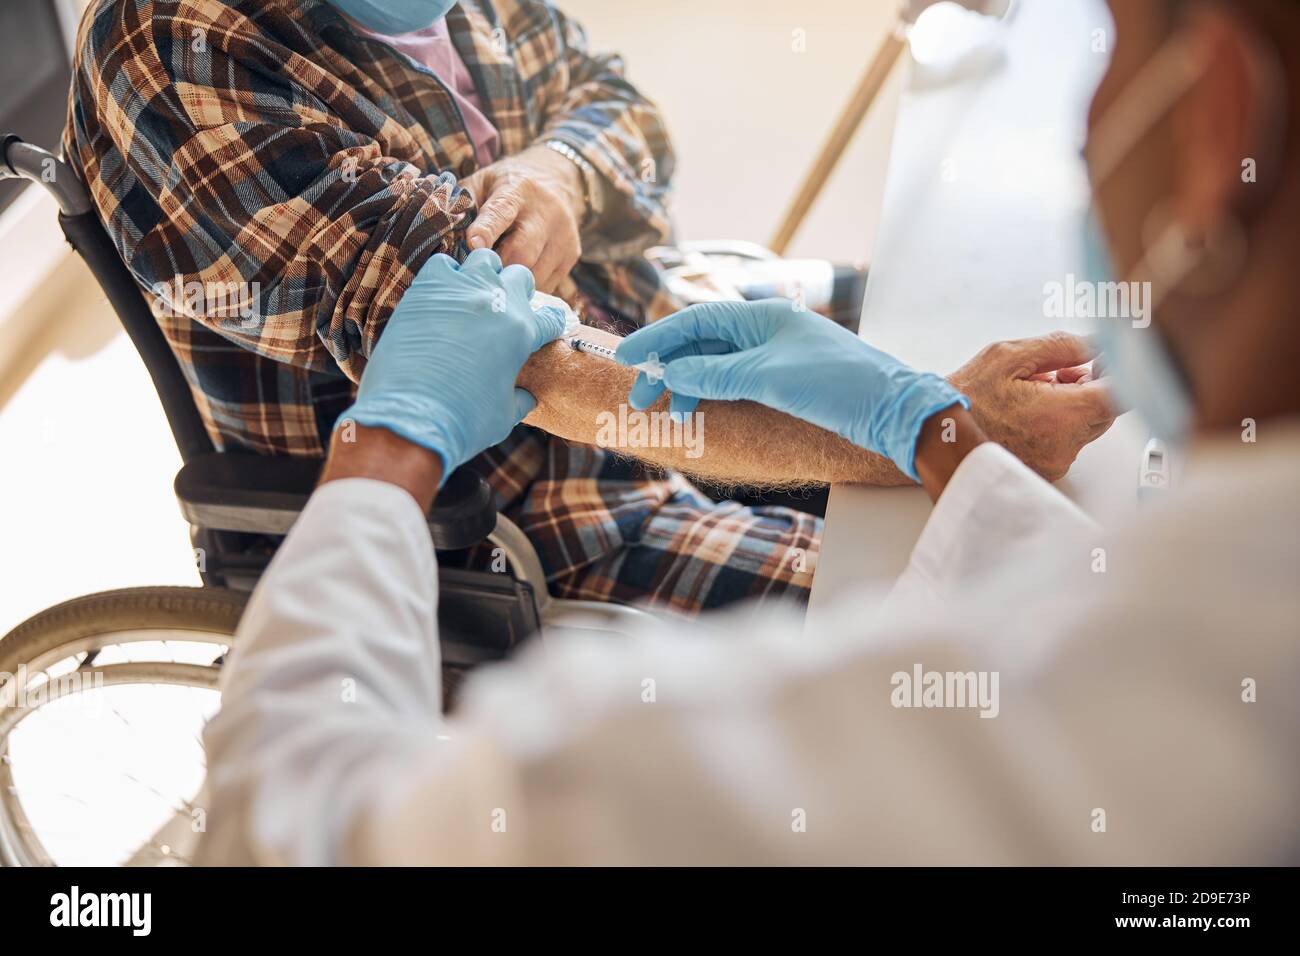 Doctor injecting insulin to a senior man Stock Photo